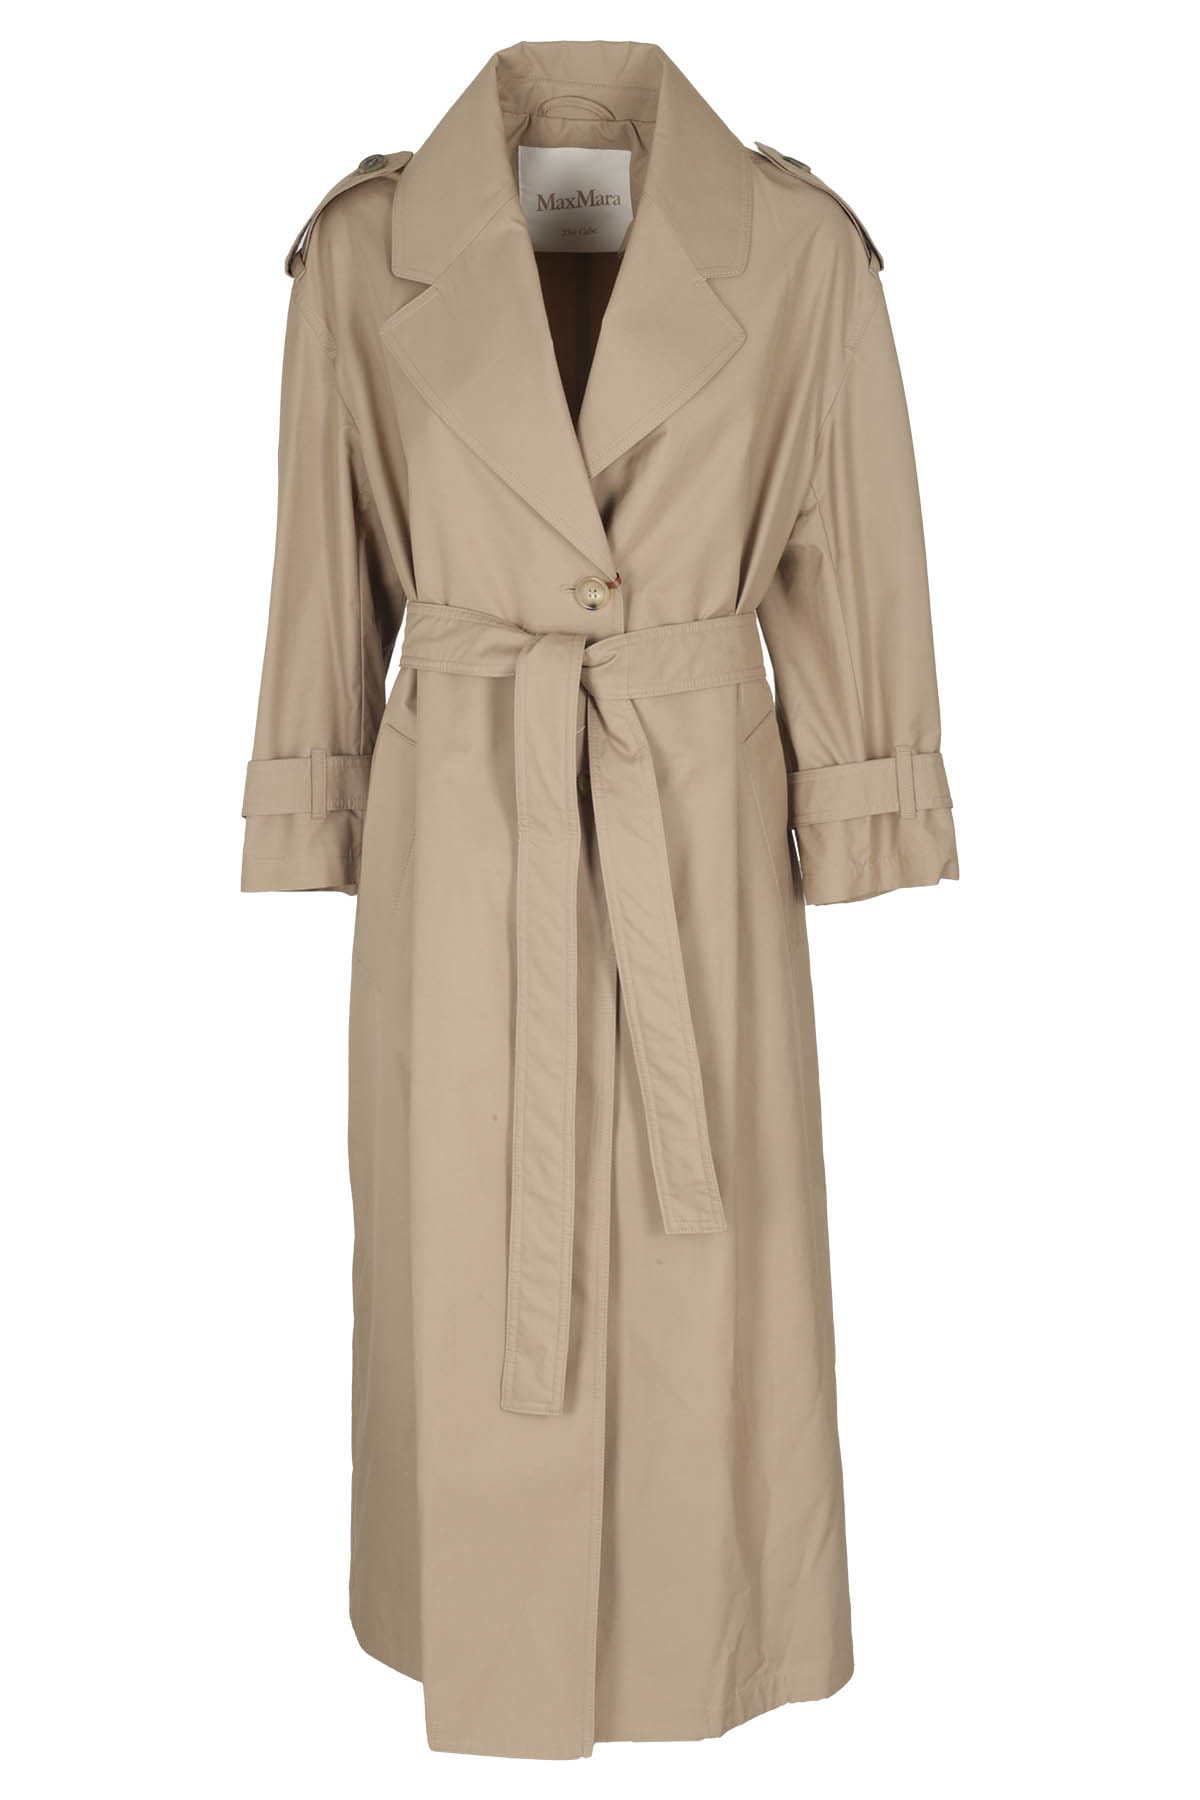 Max Mara The Cube Qtrench